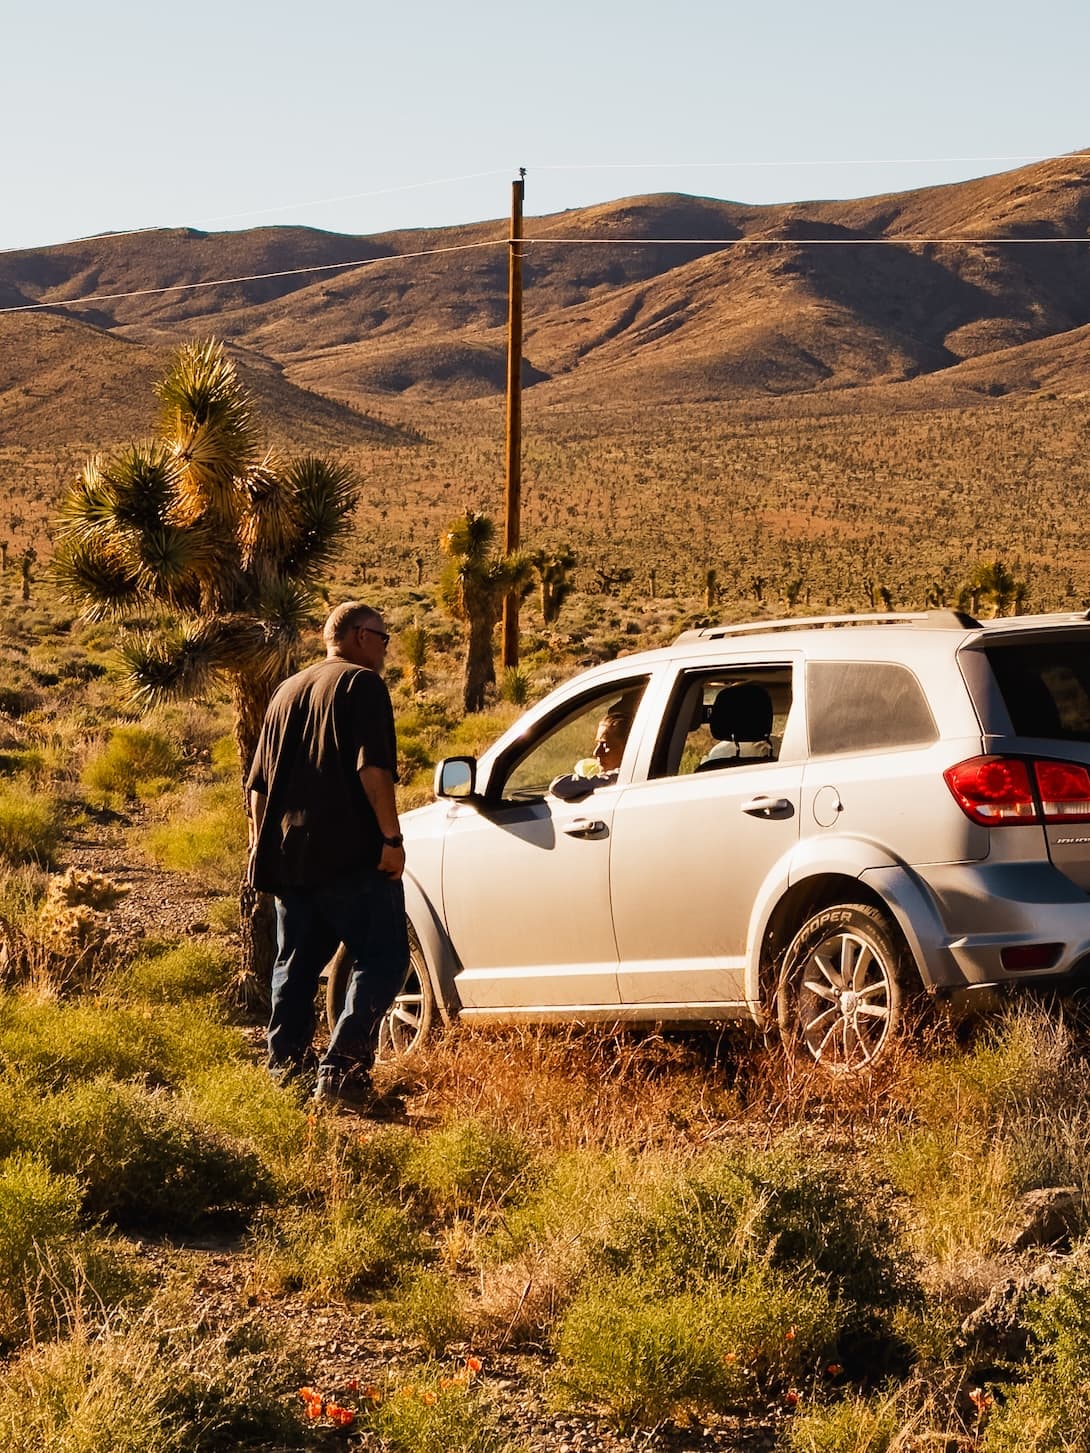 An man talks with the driver of the SUV in a desert environment with Joshua trees, with rolling hills stretching into the distance.